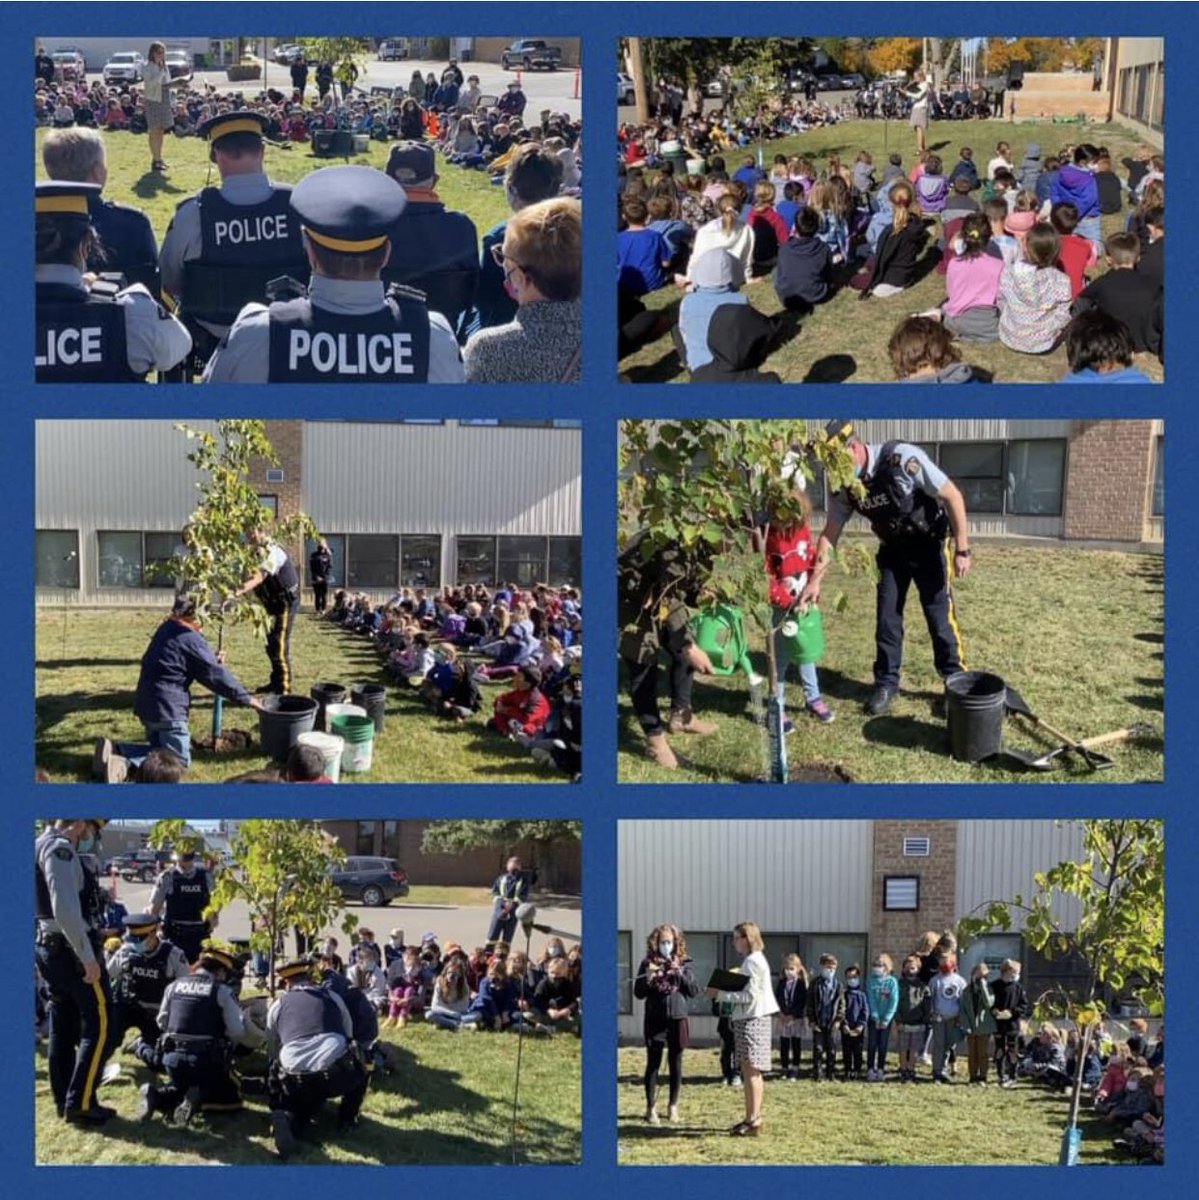 Today was a very special day for our IHES family. We planted a tree to honour the memory of Cst. Patton, whom we tragically lost last spring. We wish to thank @RCMPSK, Communities In Bloom, and everyone who contributed to our tree planting ceremony.🌳☀️💦